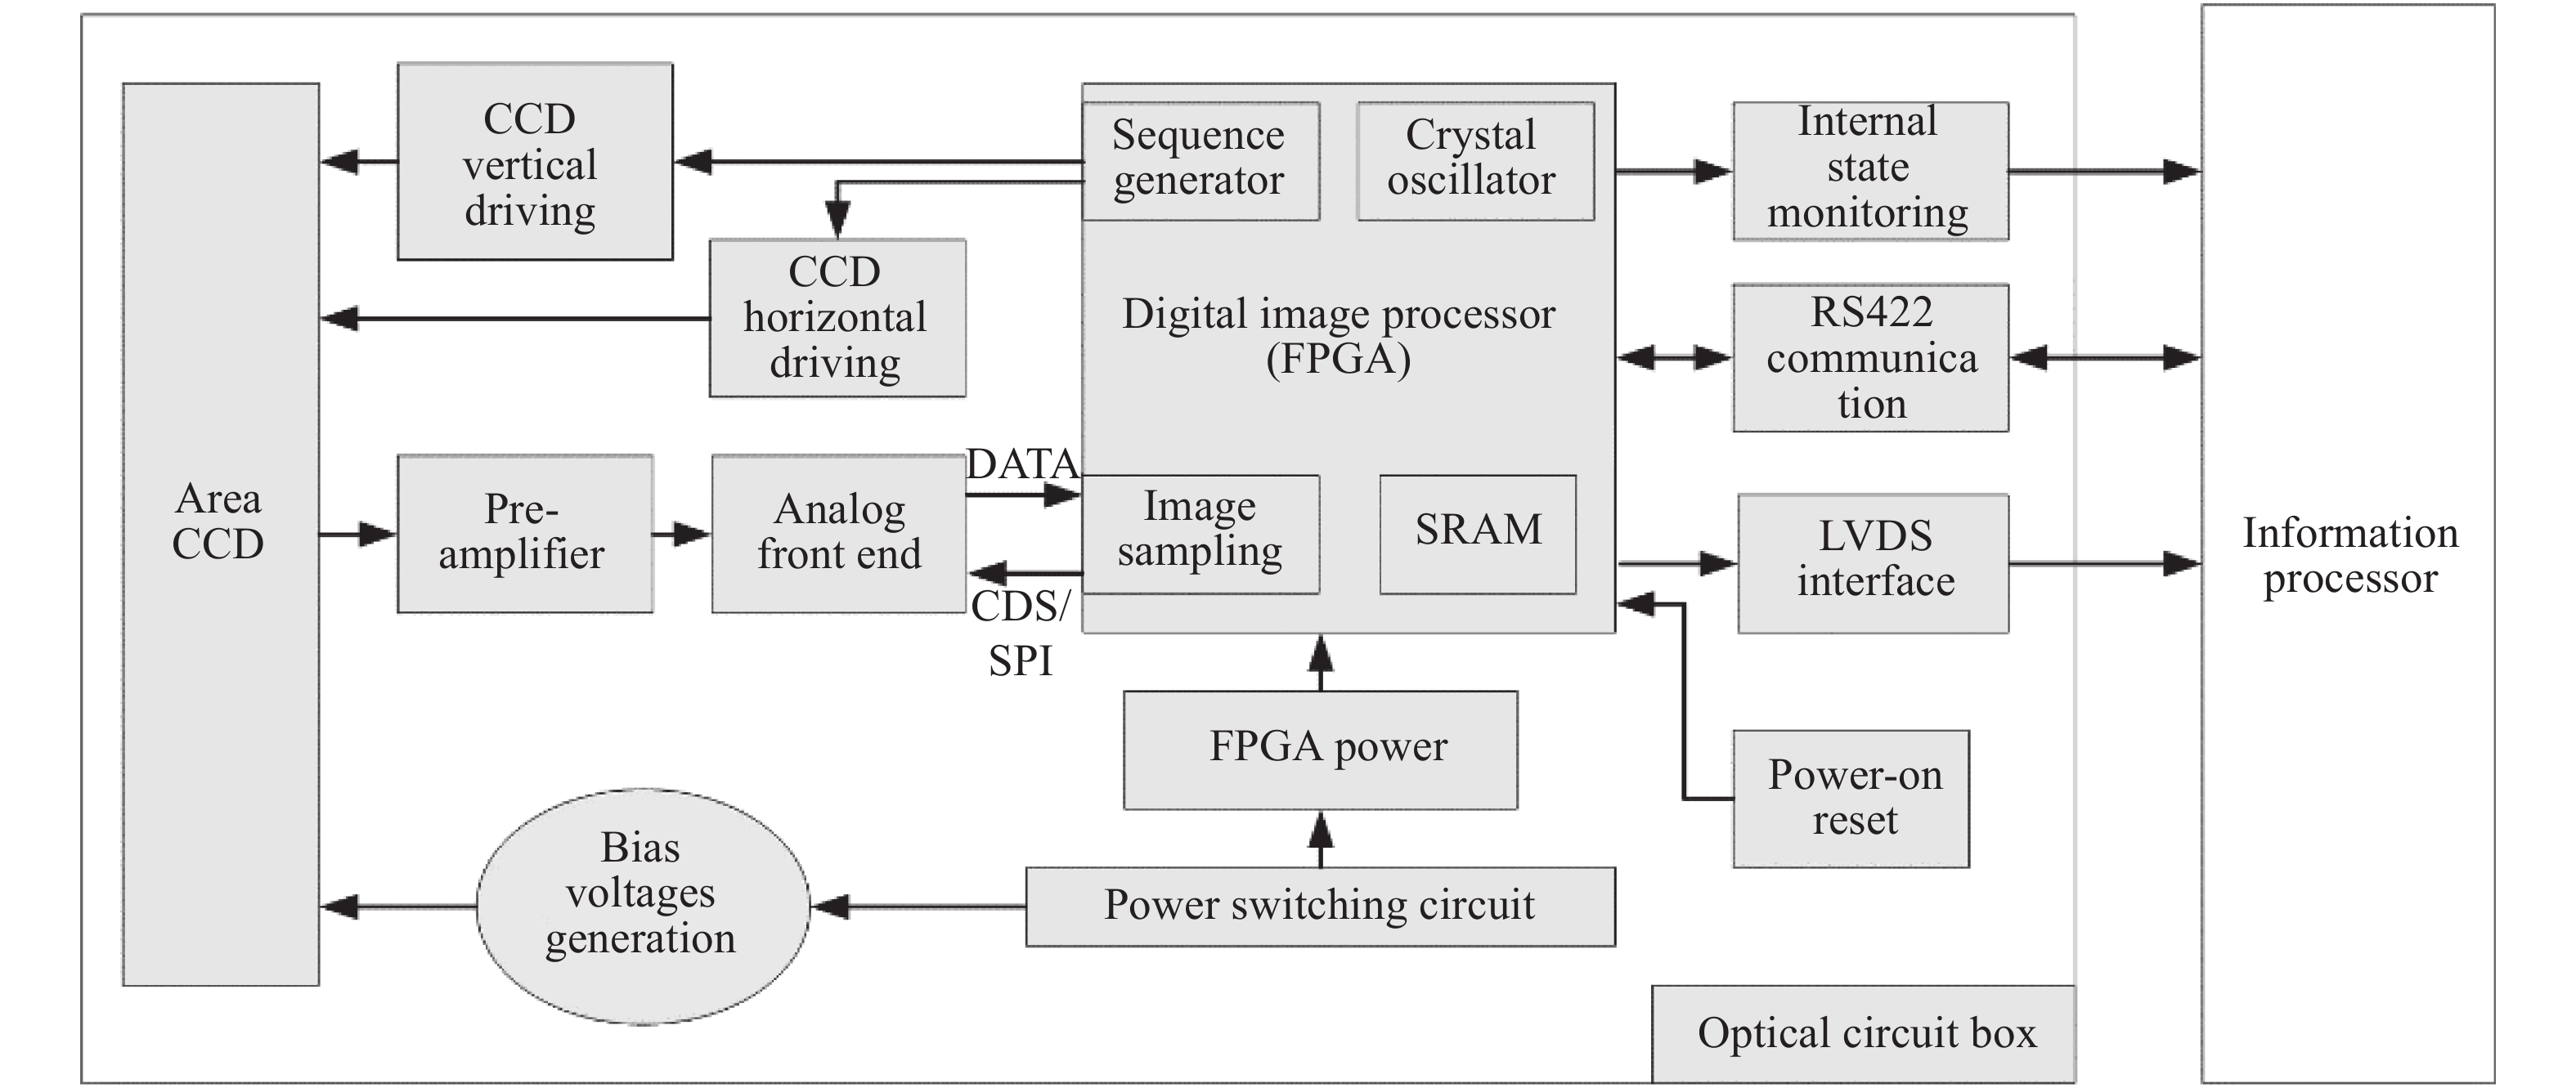 Structure of CCD image acquisition system